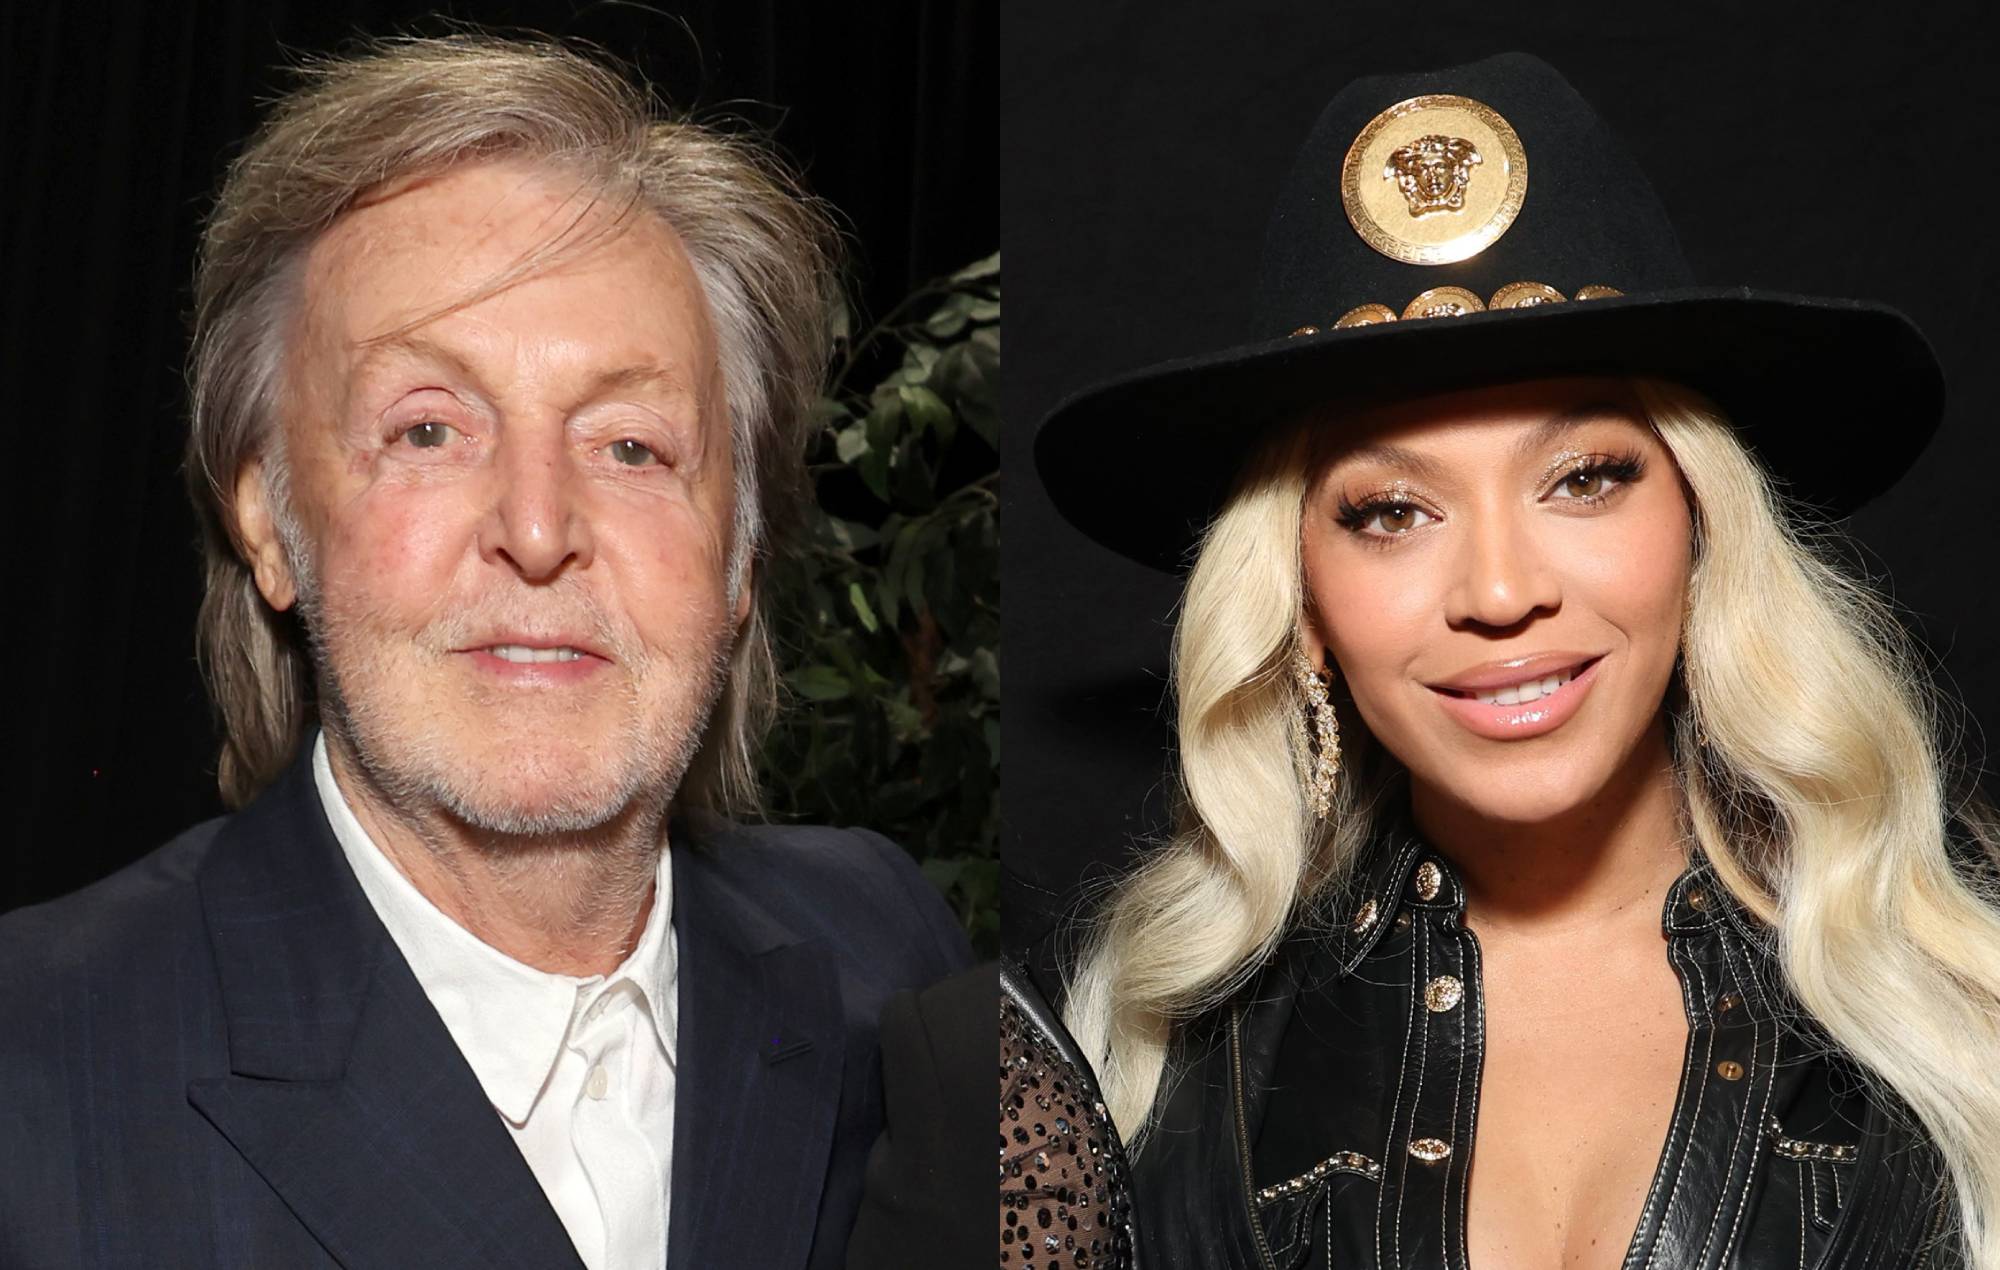 Paul McCartney speaks out on Beyoncé’s “fabulous” cover of ‘Blackbird’ for fighting “racial tension”